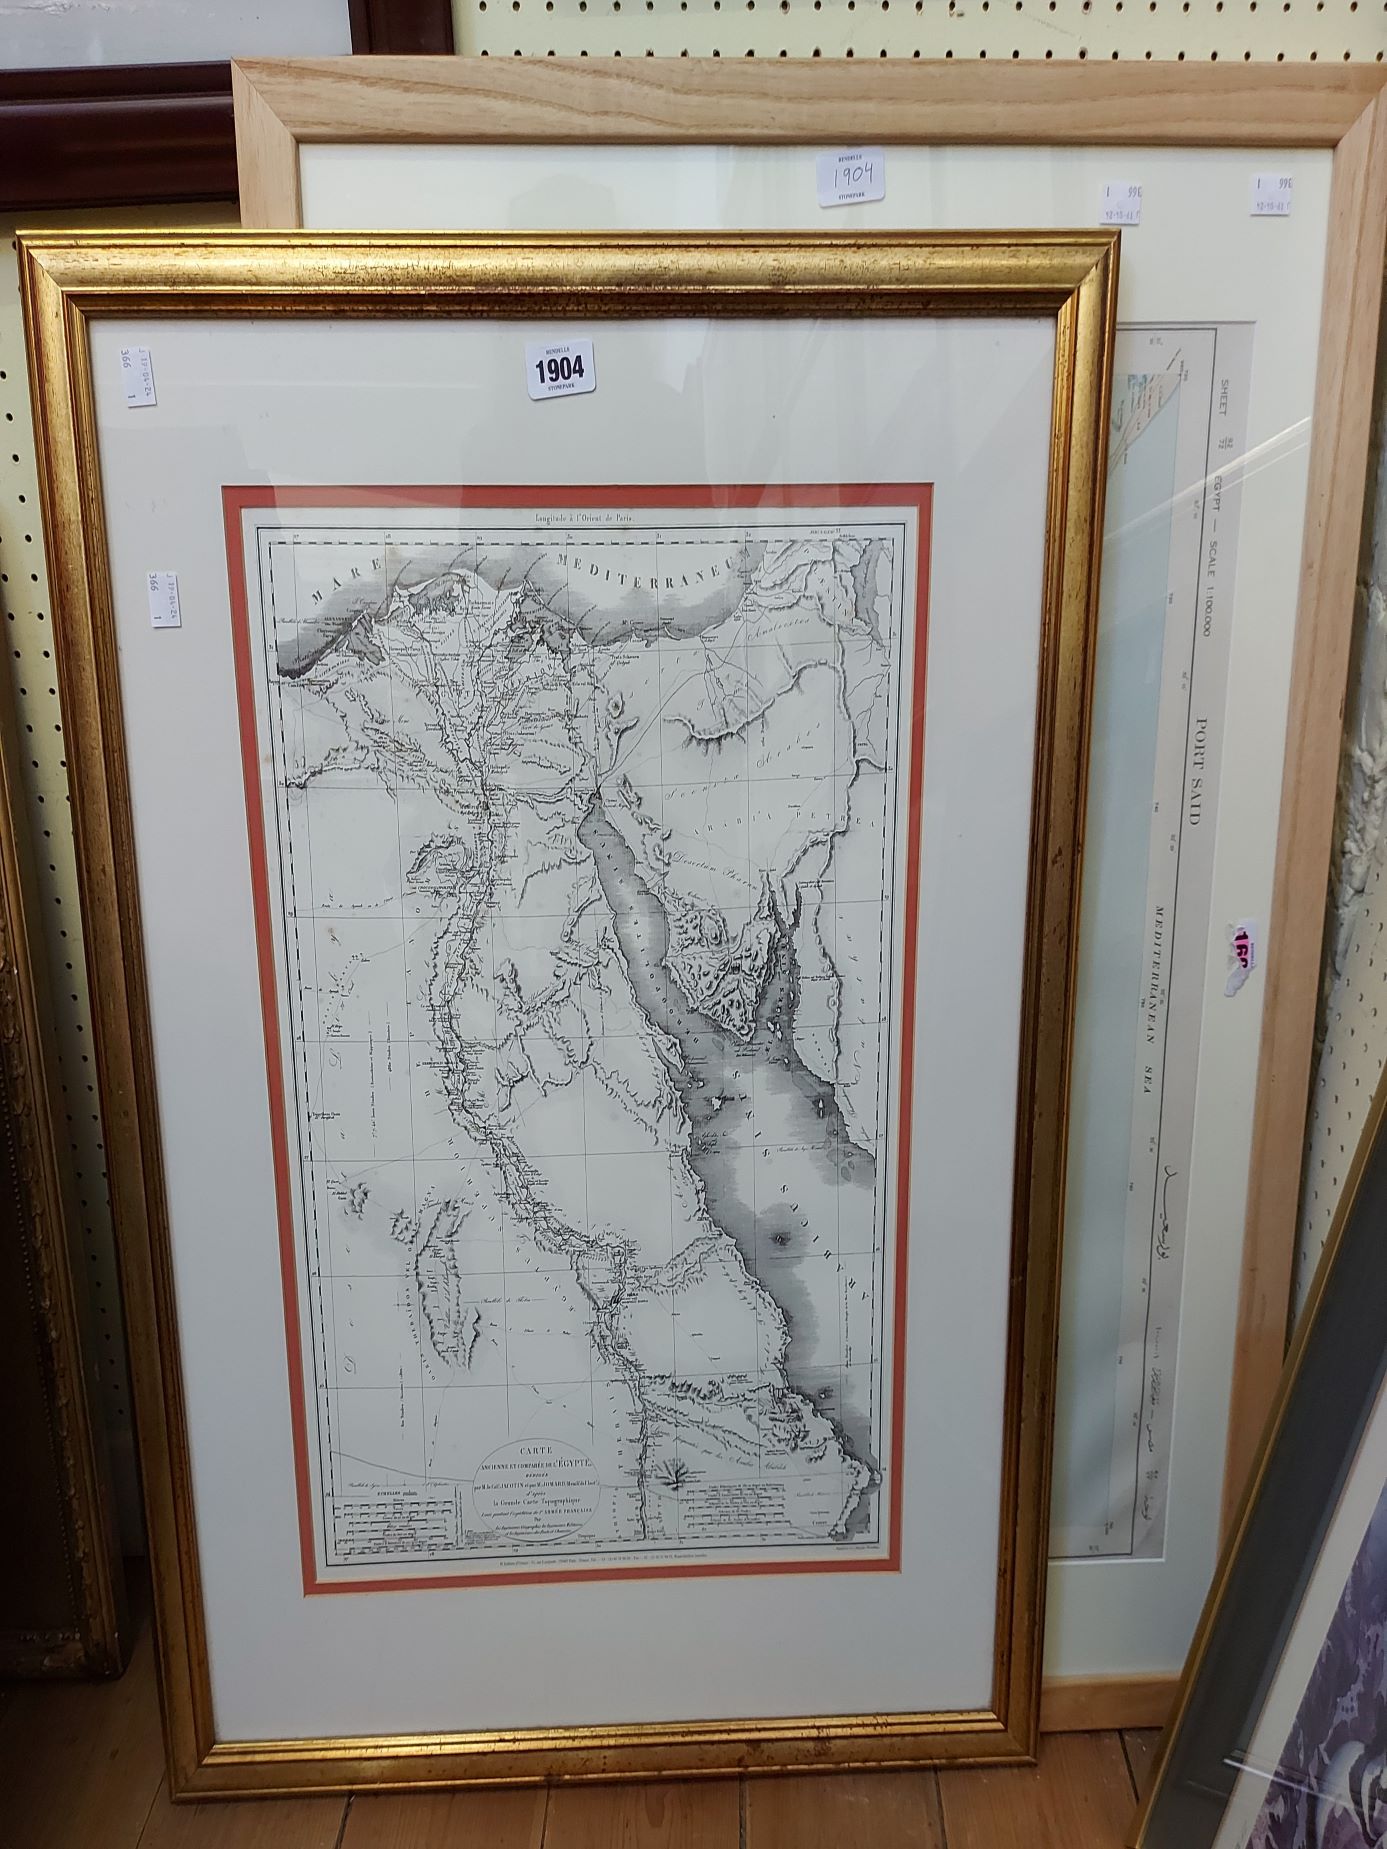 Two framed large format vintage map prints, one depicting Port Said, Egypt, the other Egypt and